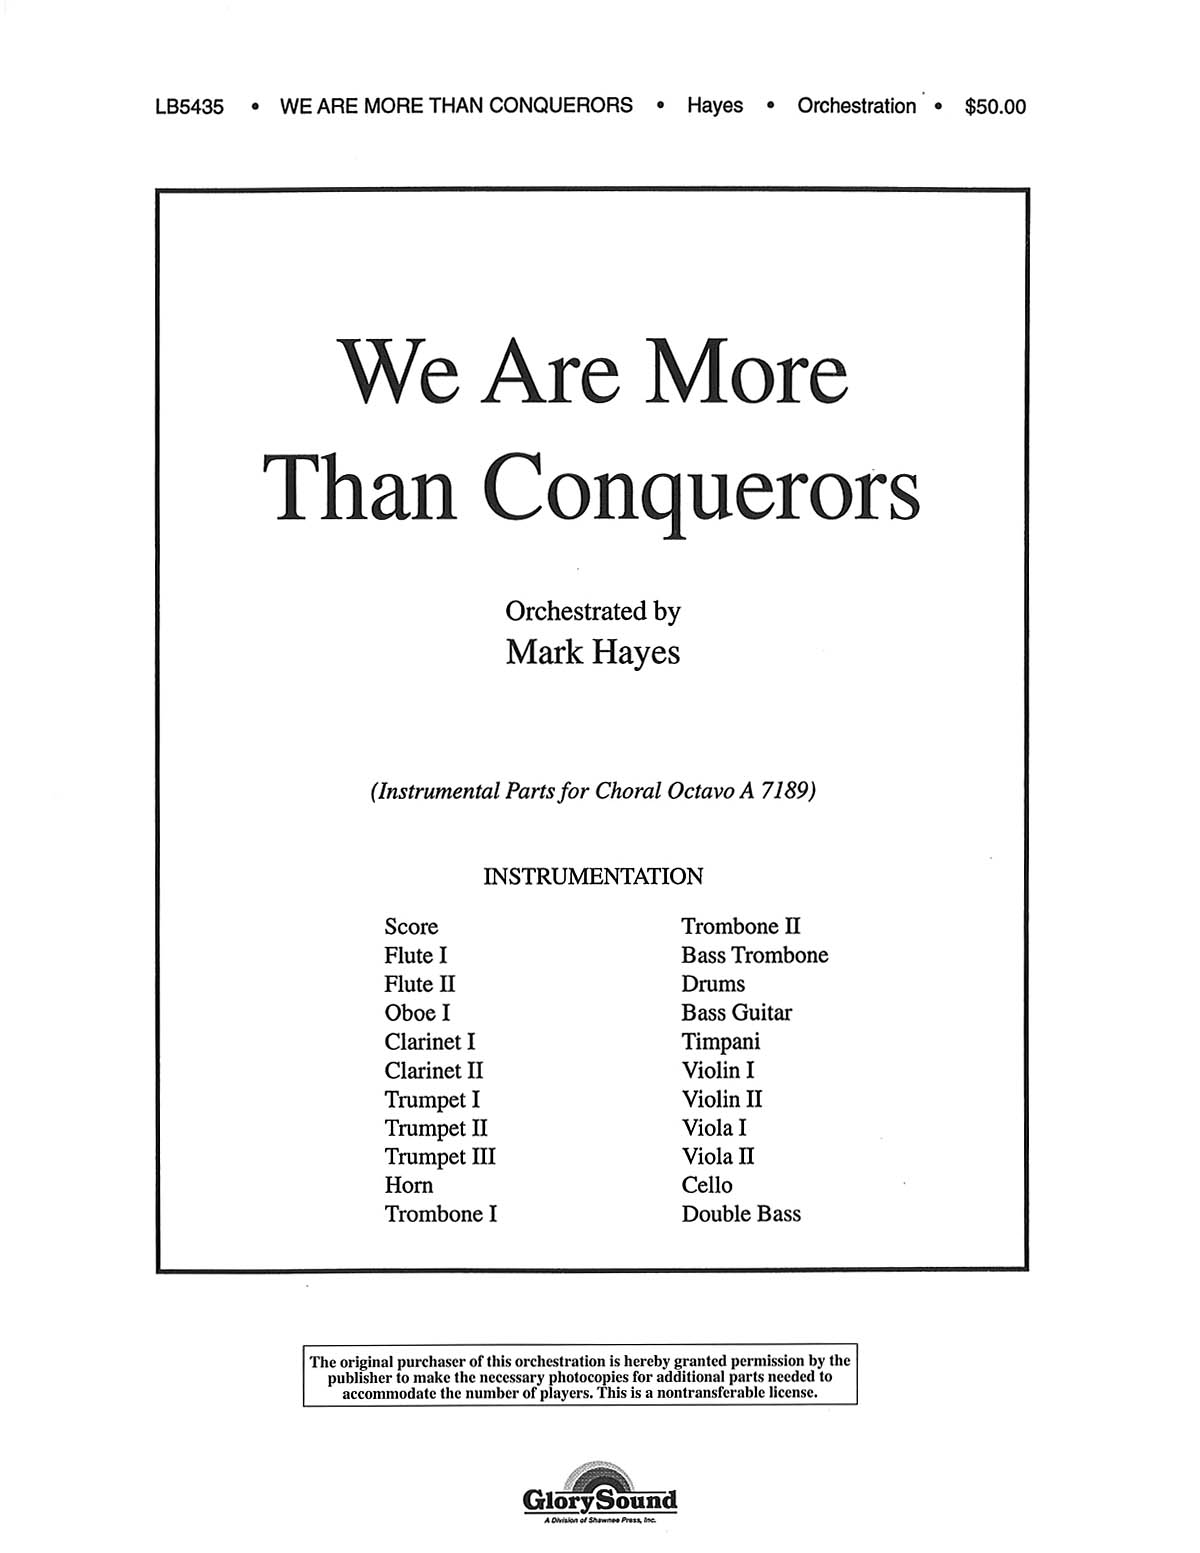 Mark Hayes: We Are More Than Conquerors: Orchestra: Parts